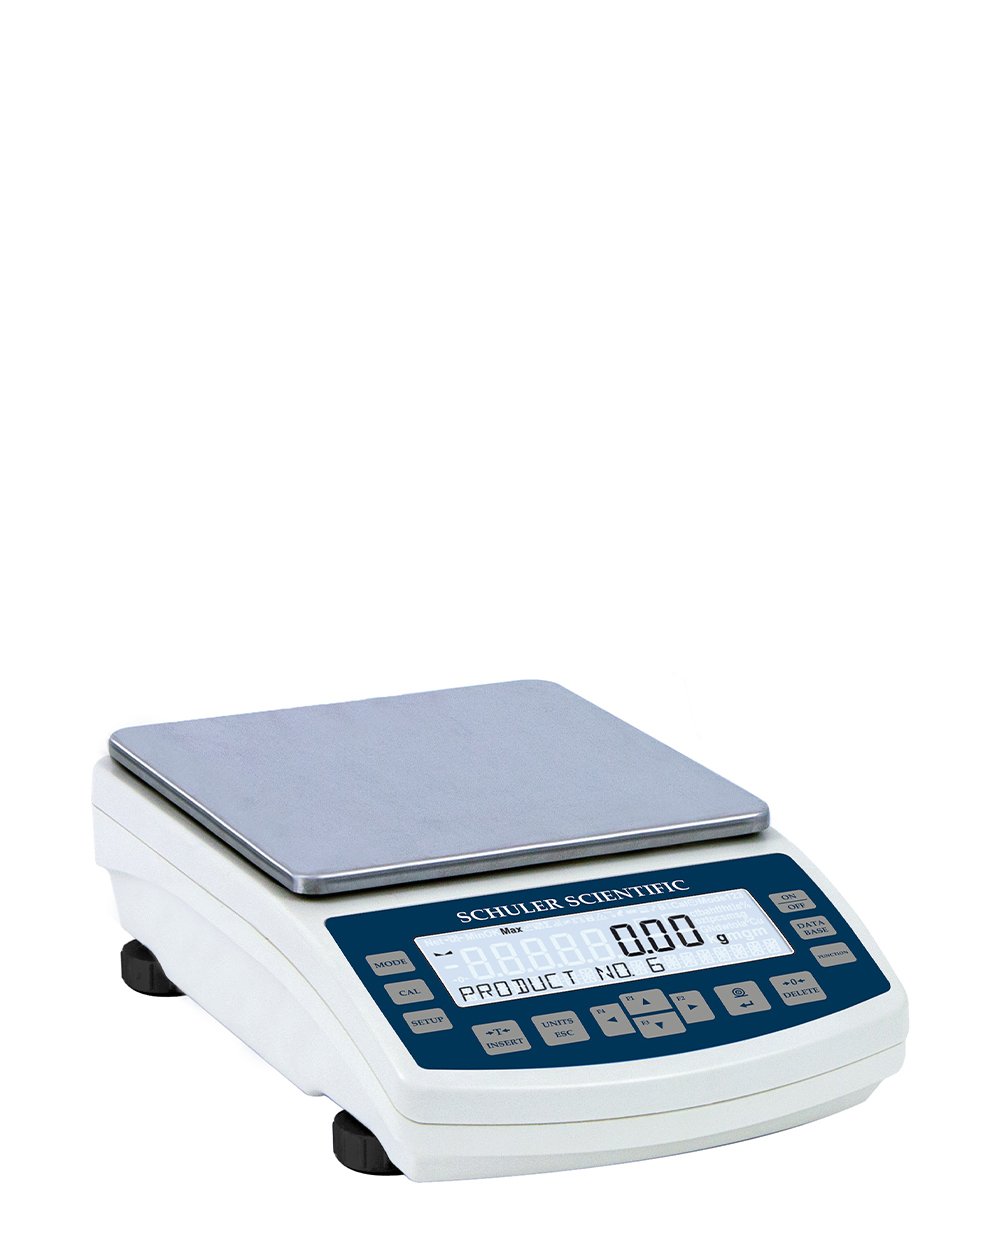 SCHULER SCIENTIFIC | NTEP Certified A-Series SPS-2102 Scale | 2100g Capacity - 0.01g Readability - 1